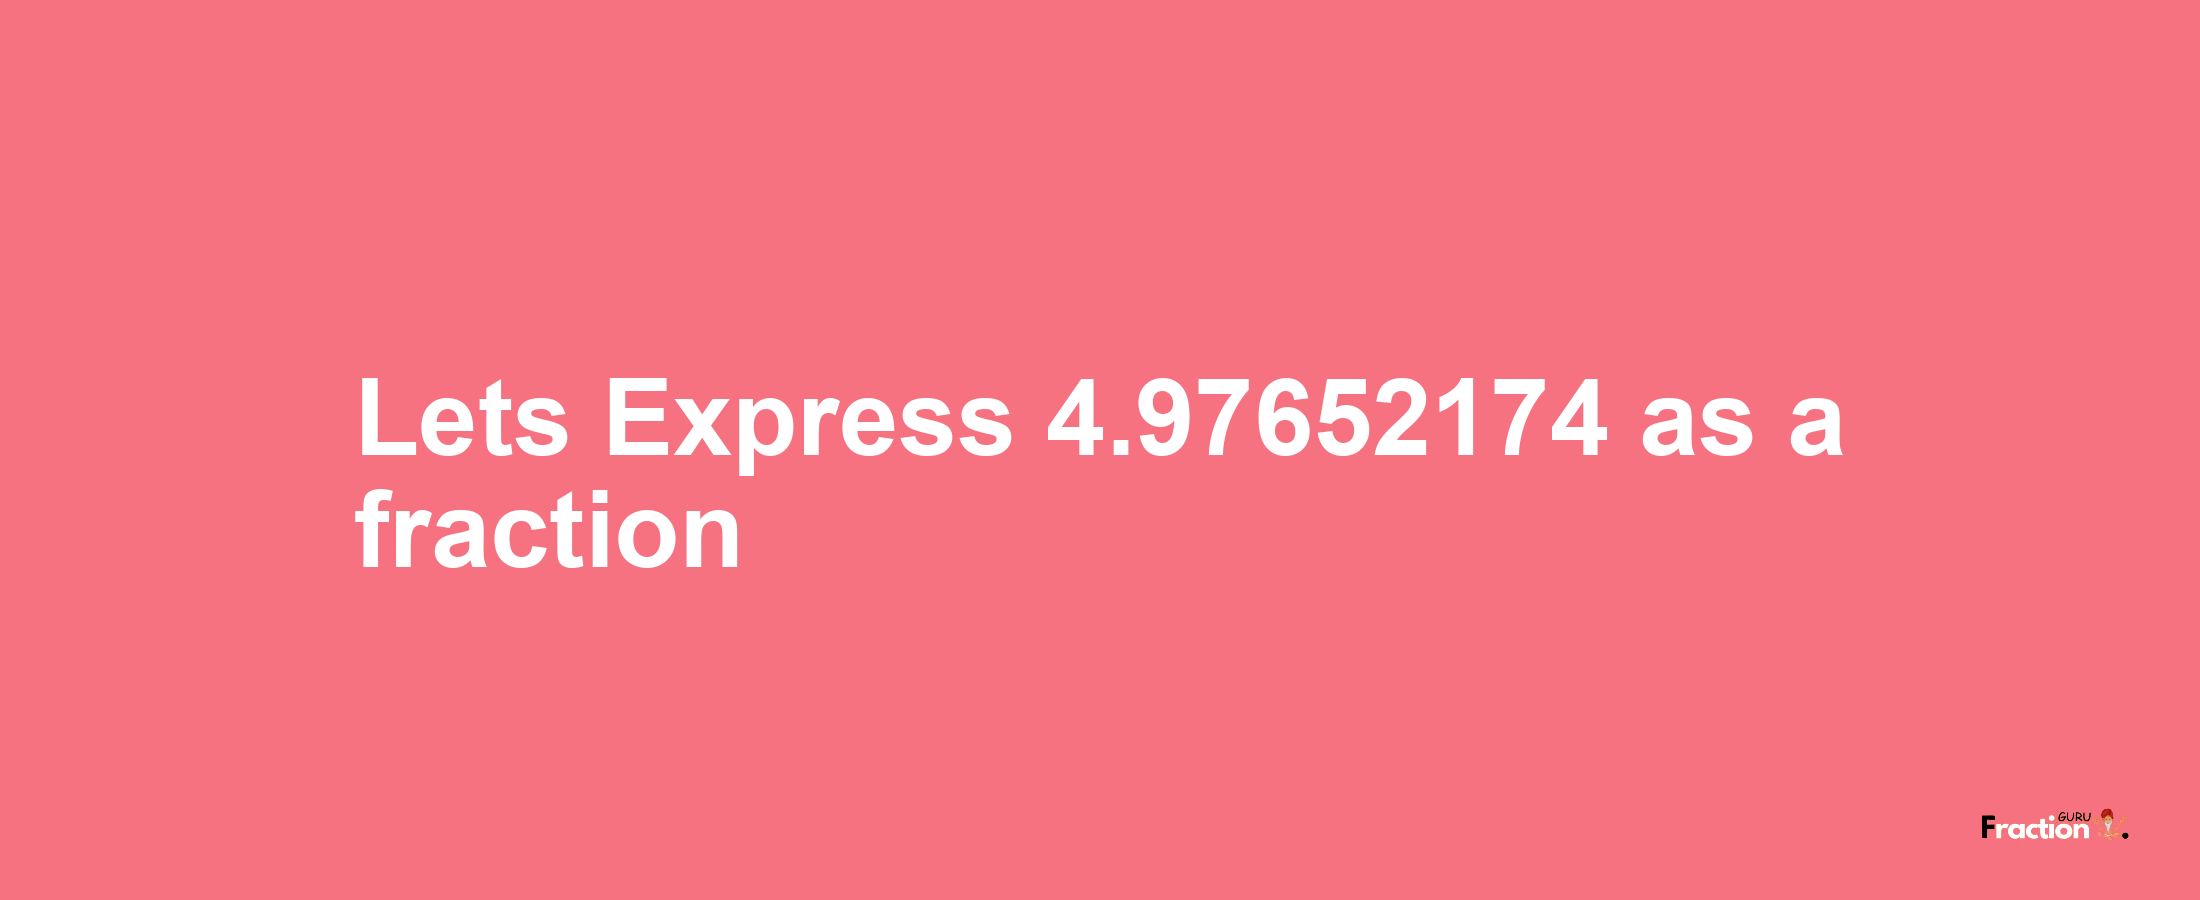 Lets Express 4.97652174 as afraction